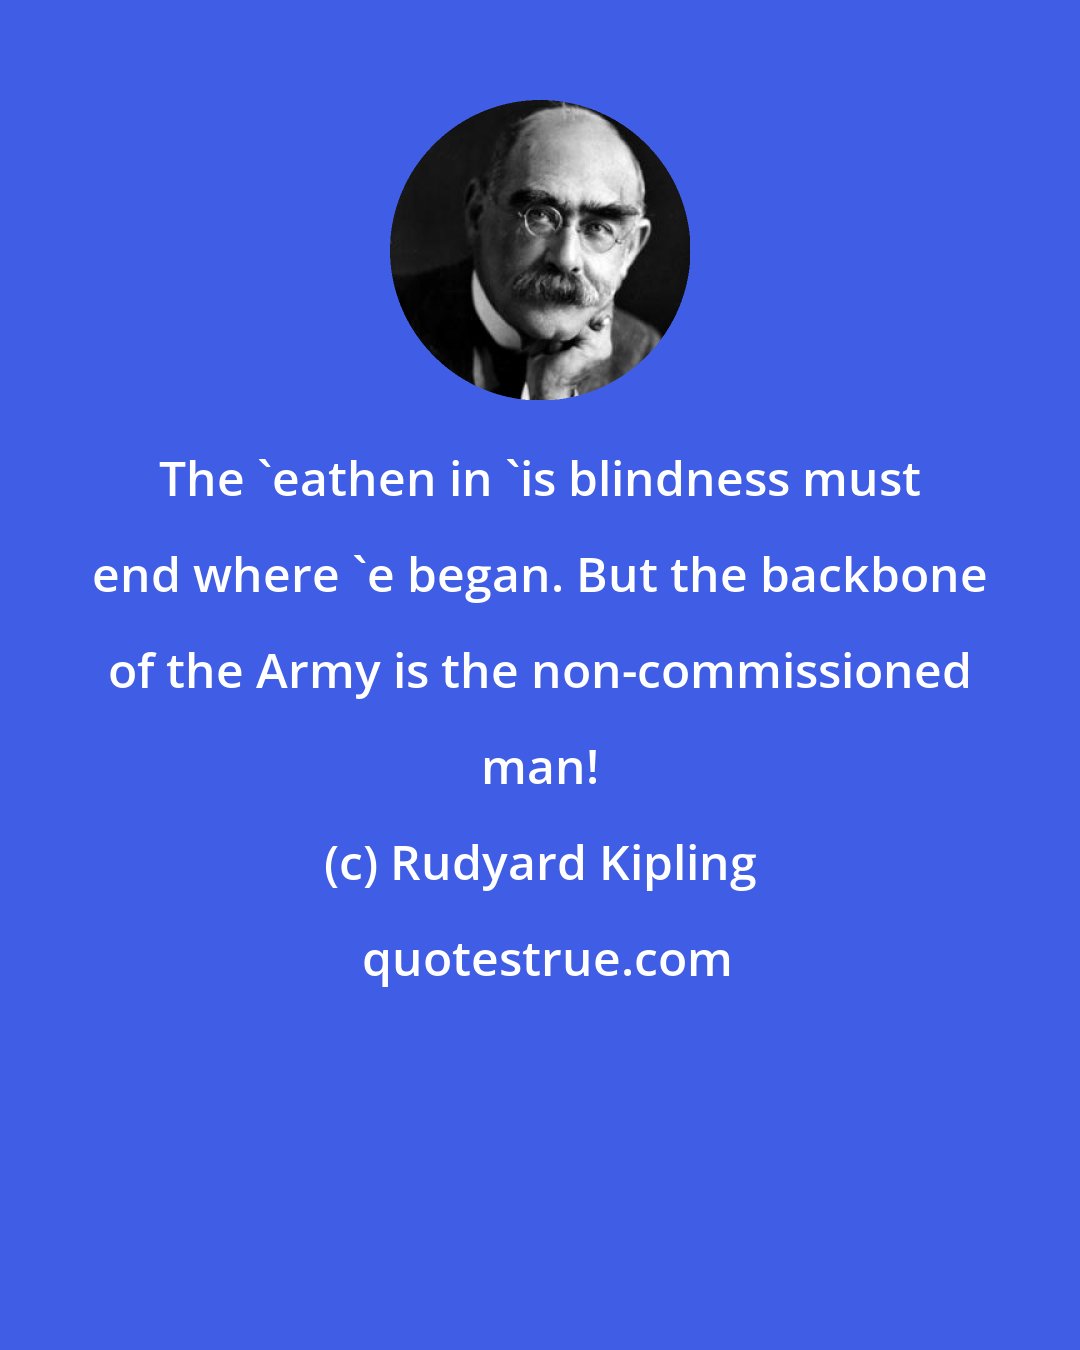 Rudyard Kipling: The 'eathen in 'is blindness must end where 'e began. But the backbone of the Army is the non-commissioned man!